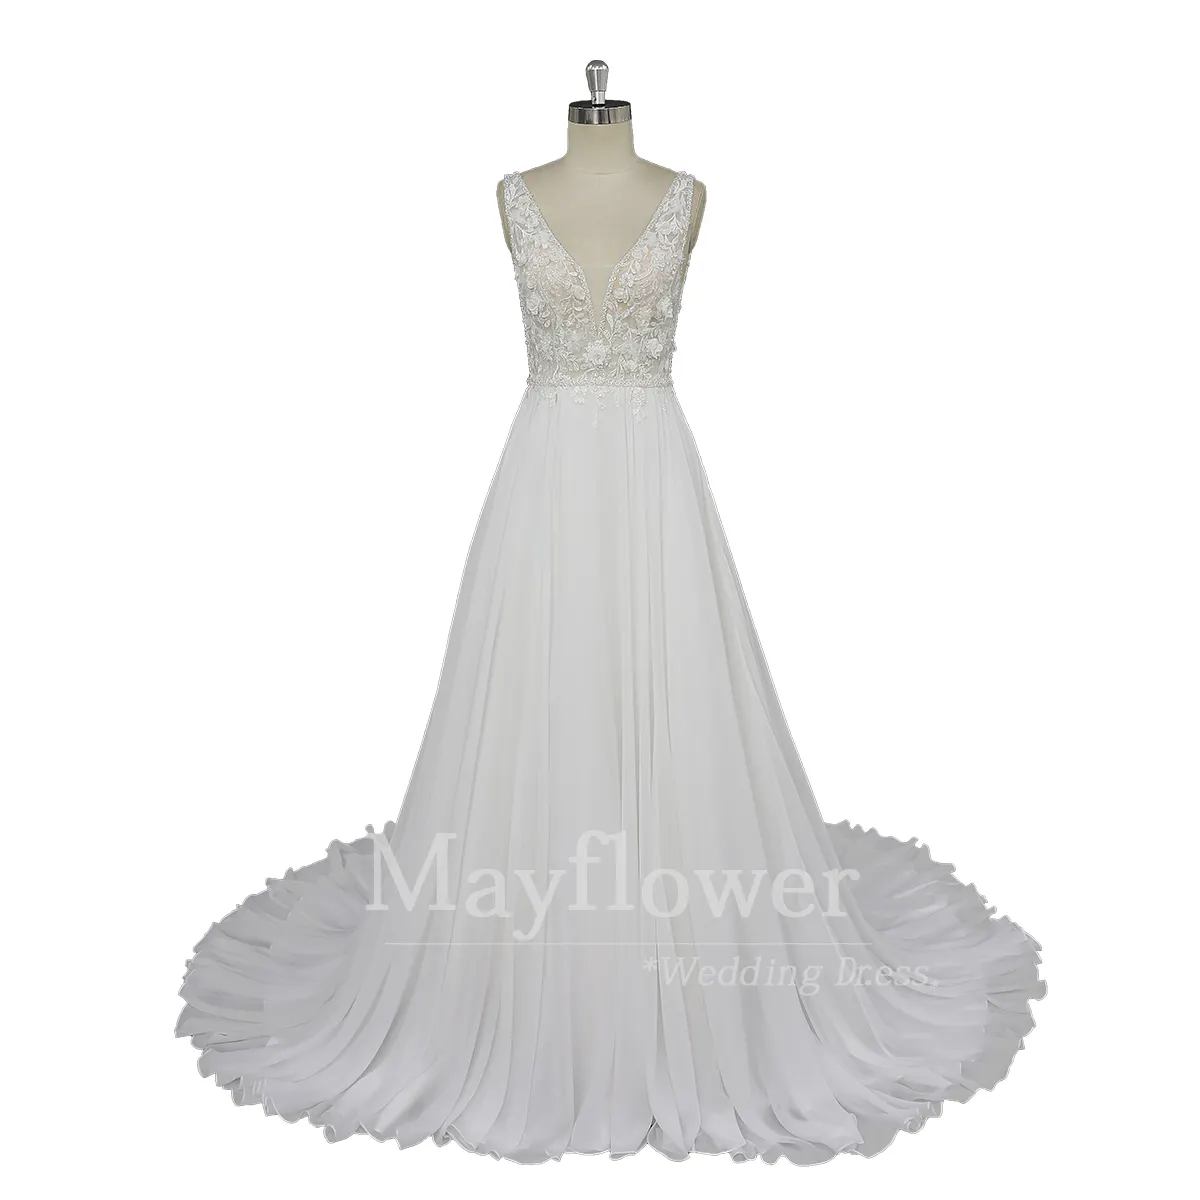 See through corset chiffon wedding gown pink 3d flowers lace wedding dresses